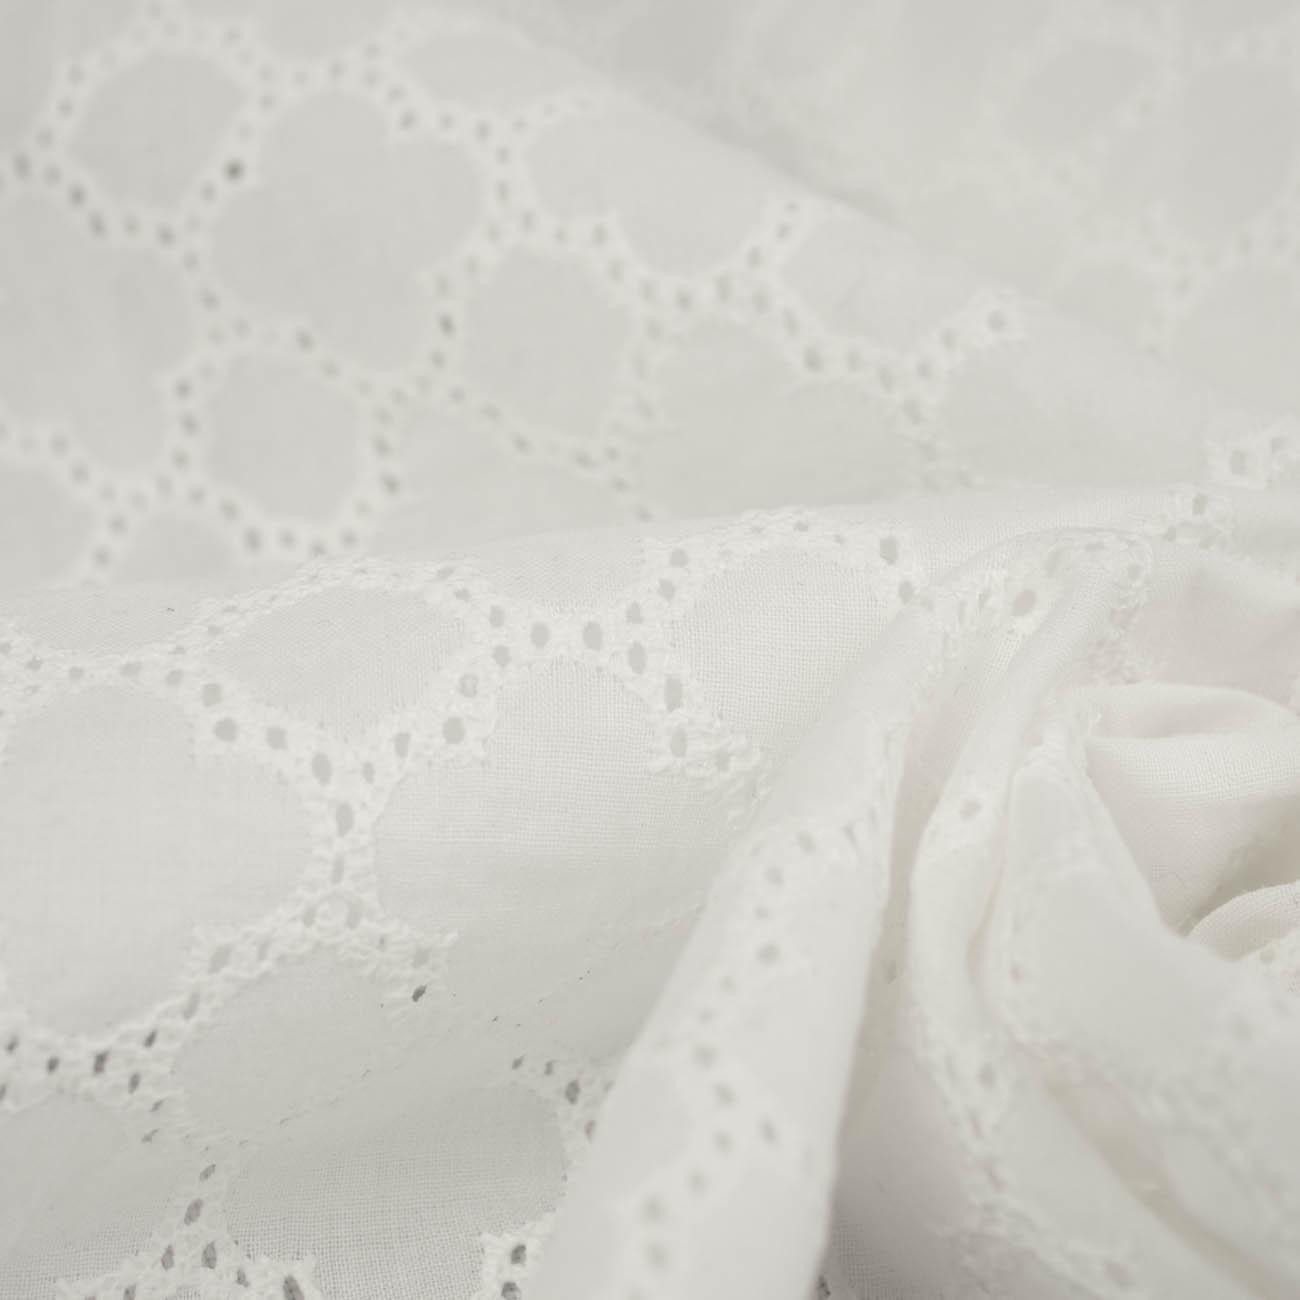  FLOWERS / white - Embroidered cotton fabric